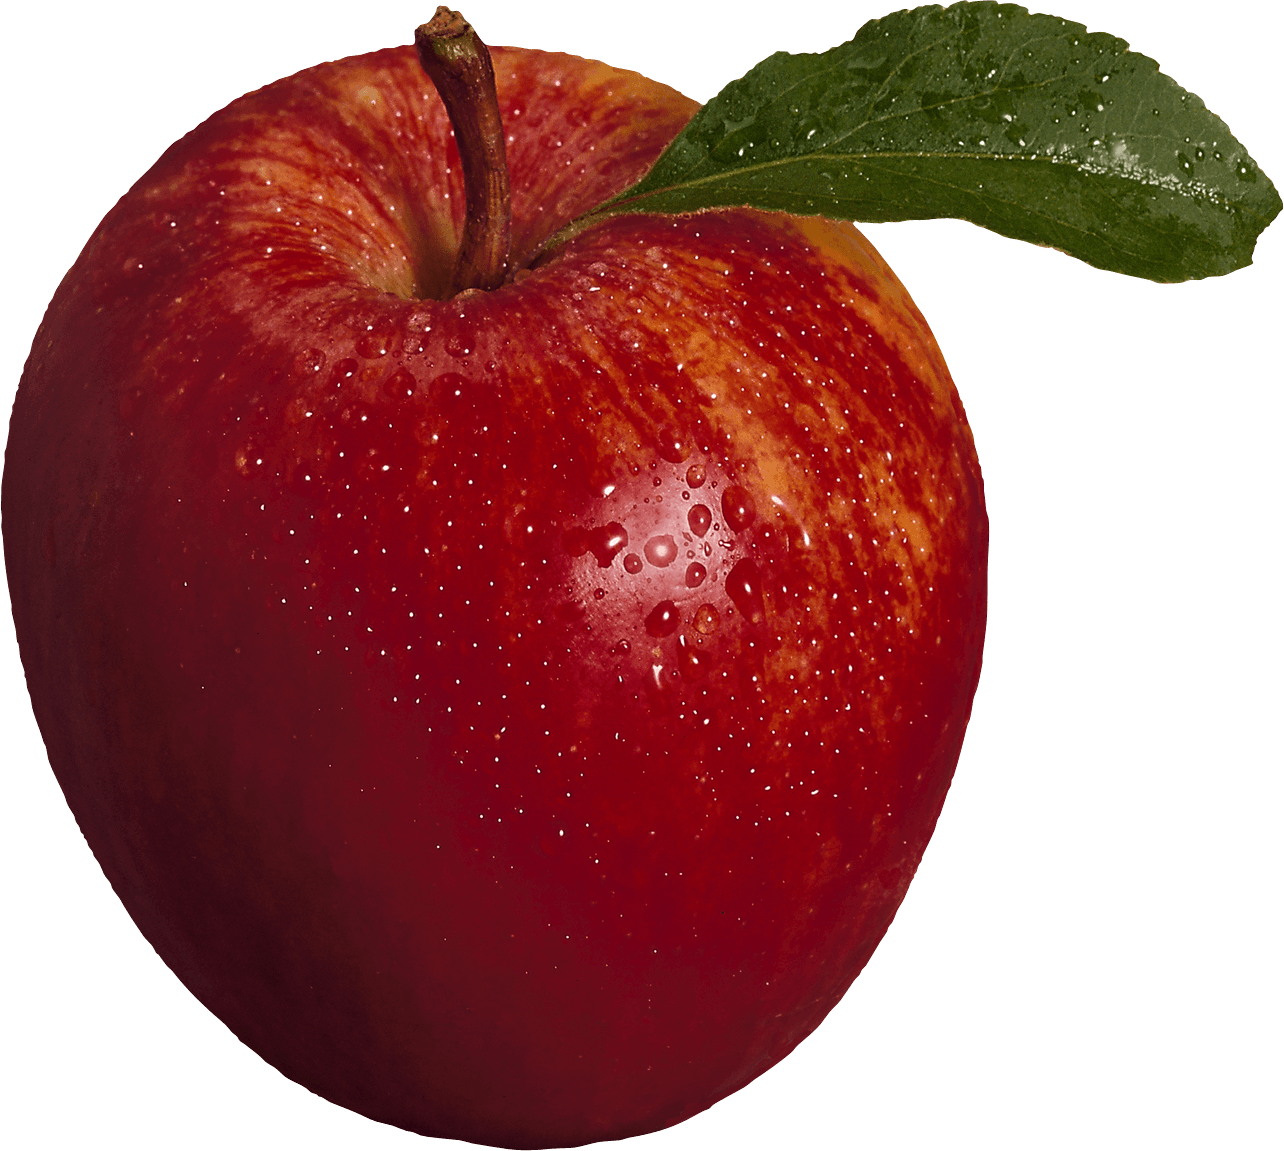 Download PNG image - Red Apple PNG Image 